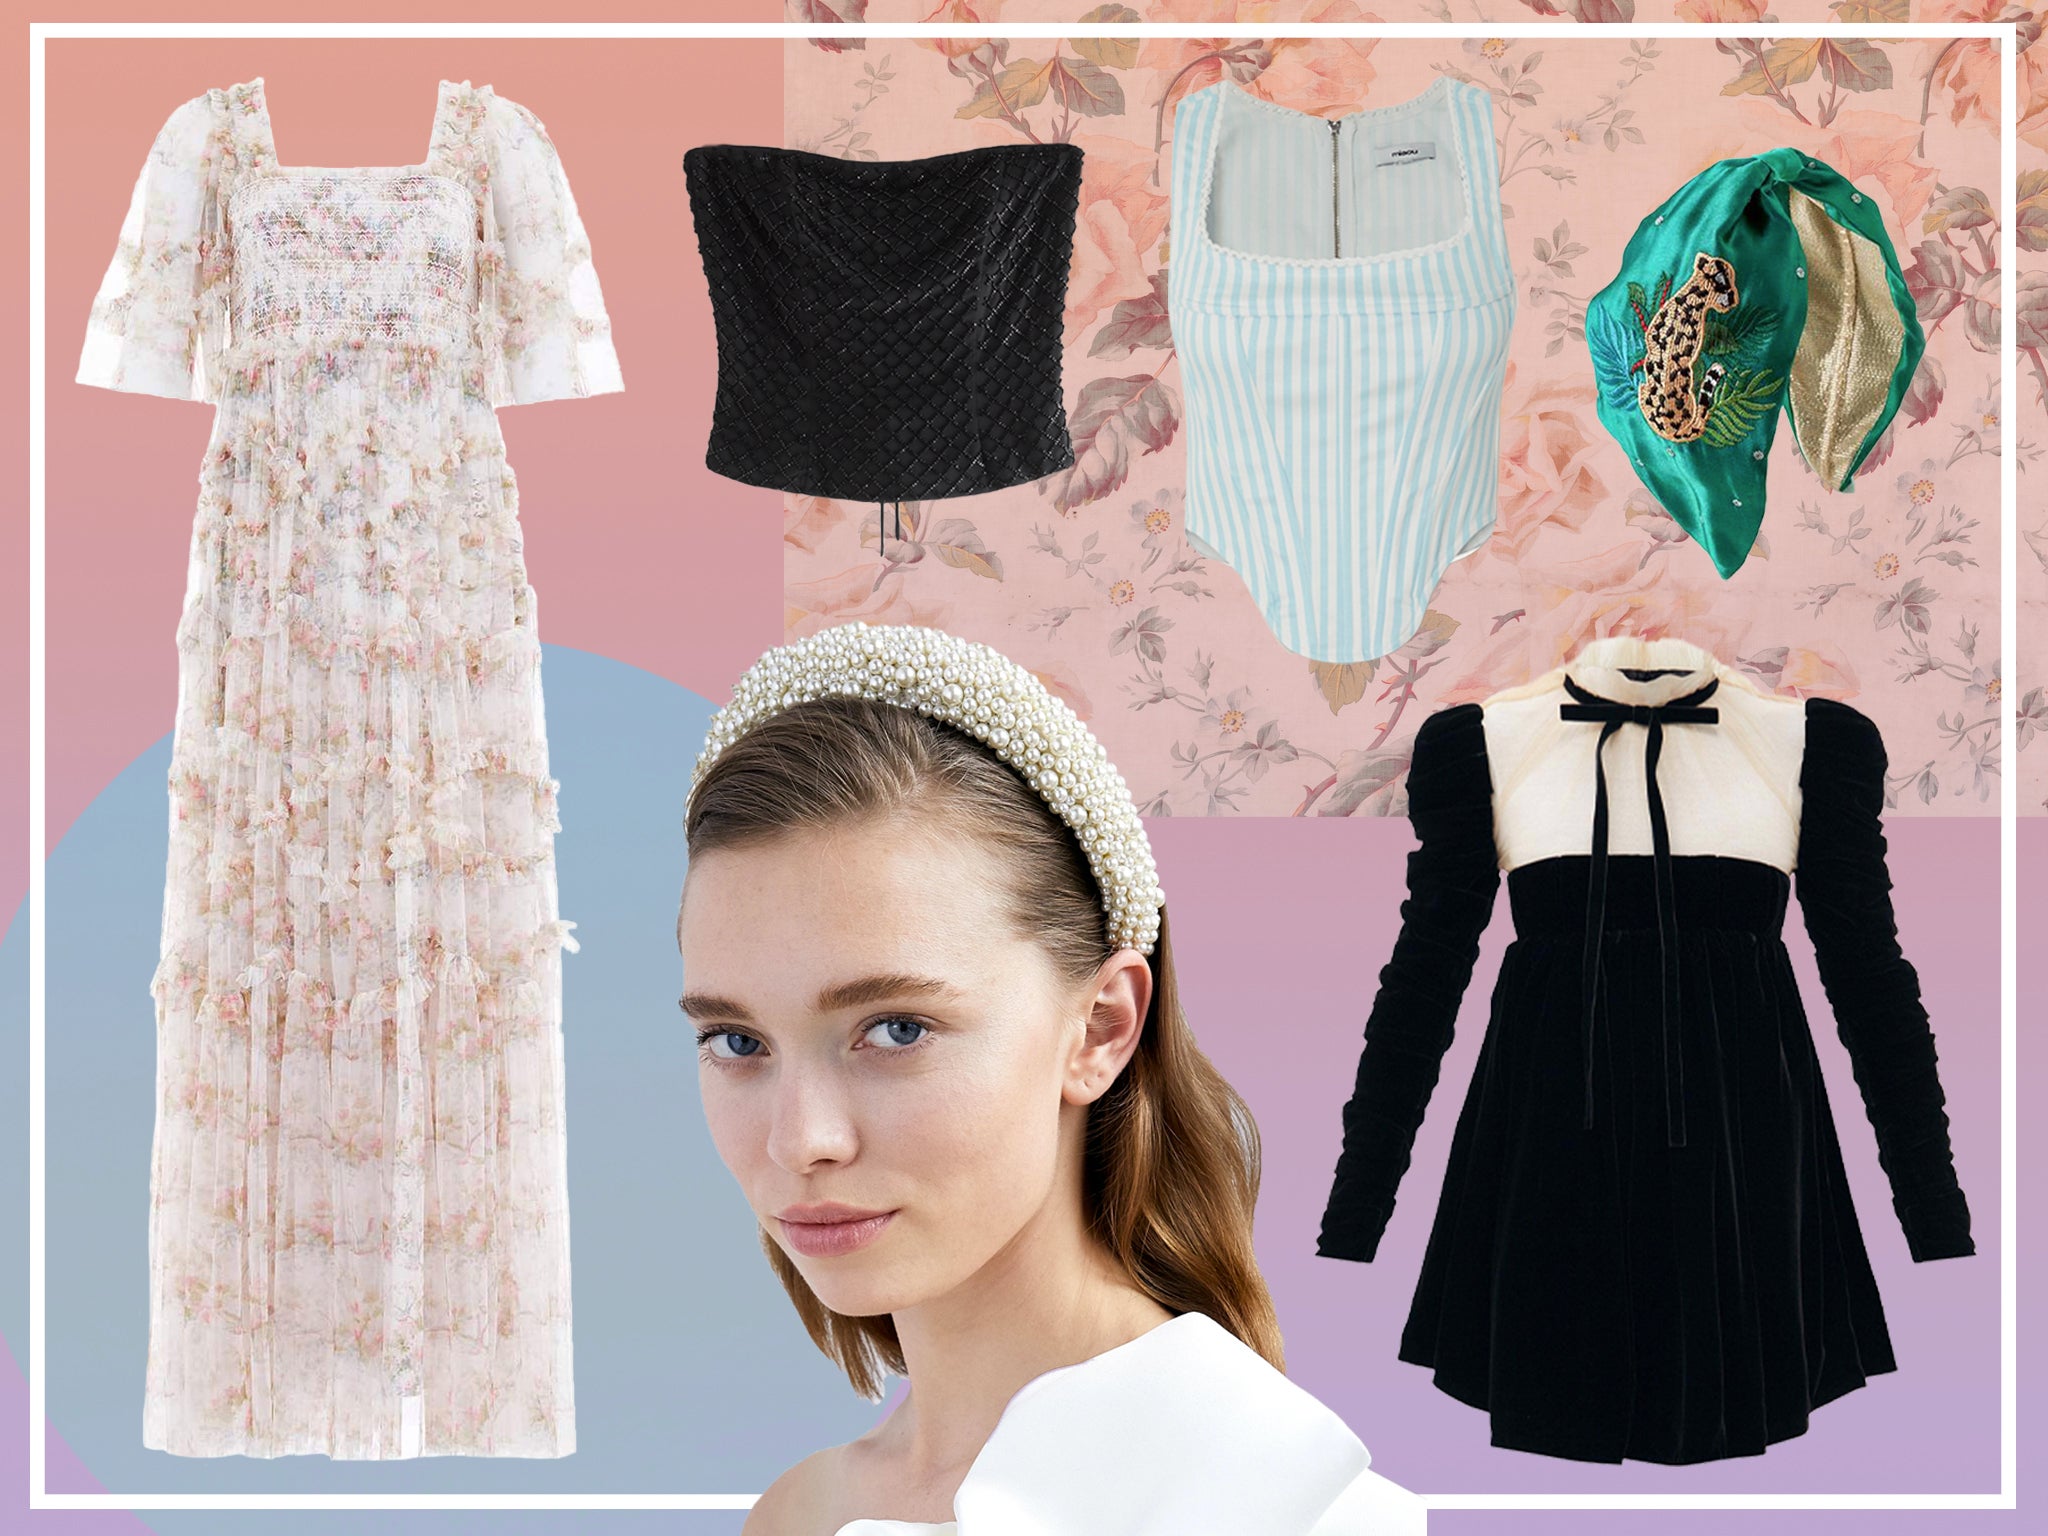 We’ve rounded up the best frocks and accessories inspired by the surprisingly chic early 1800s